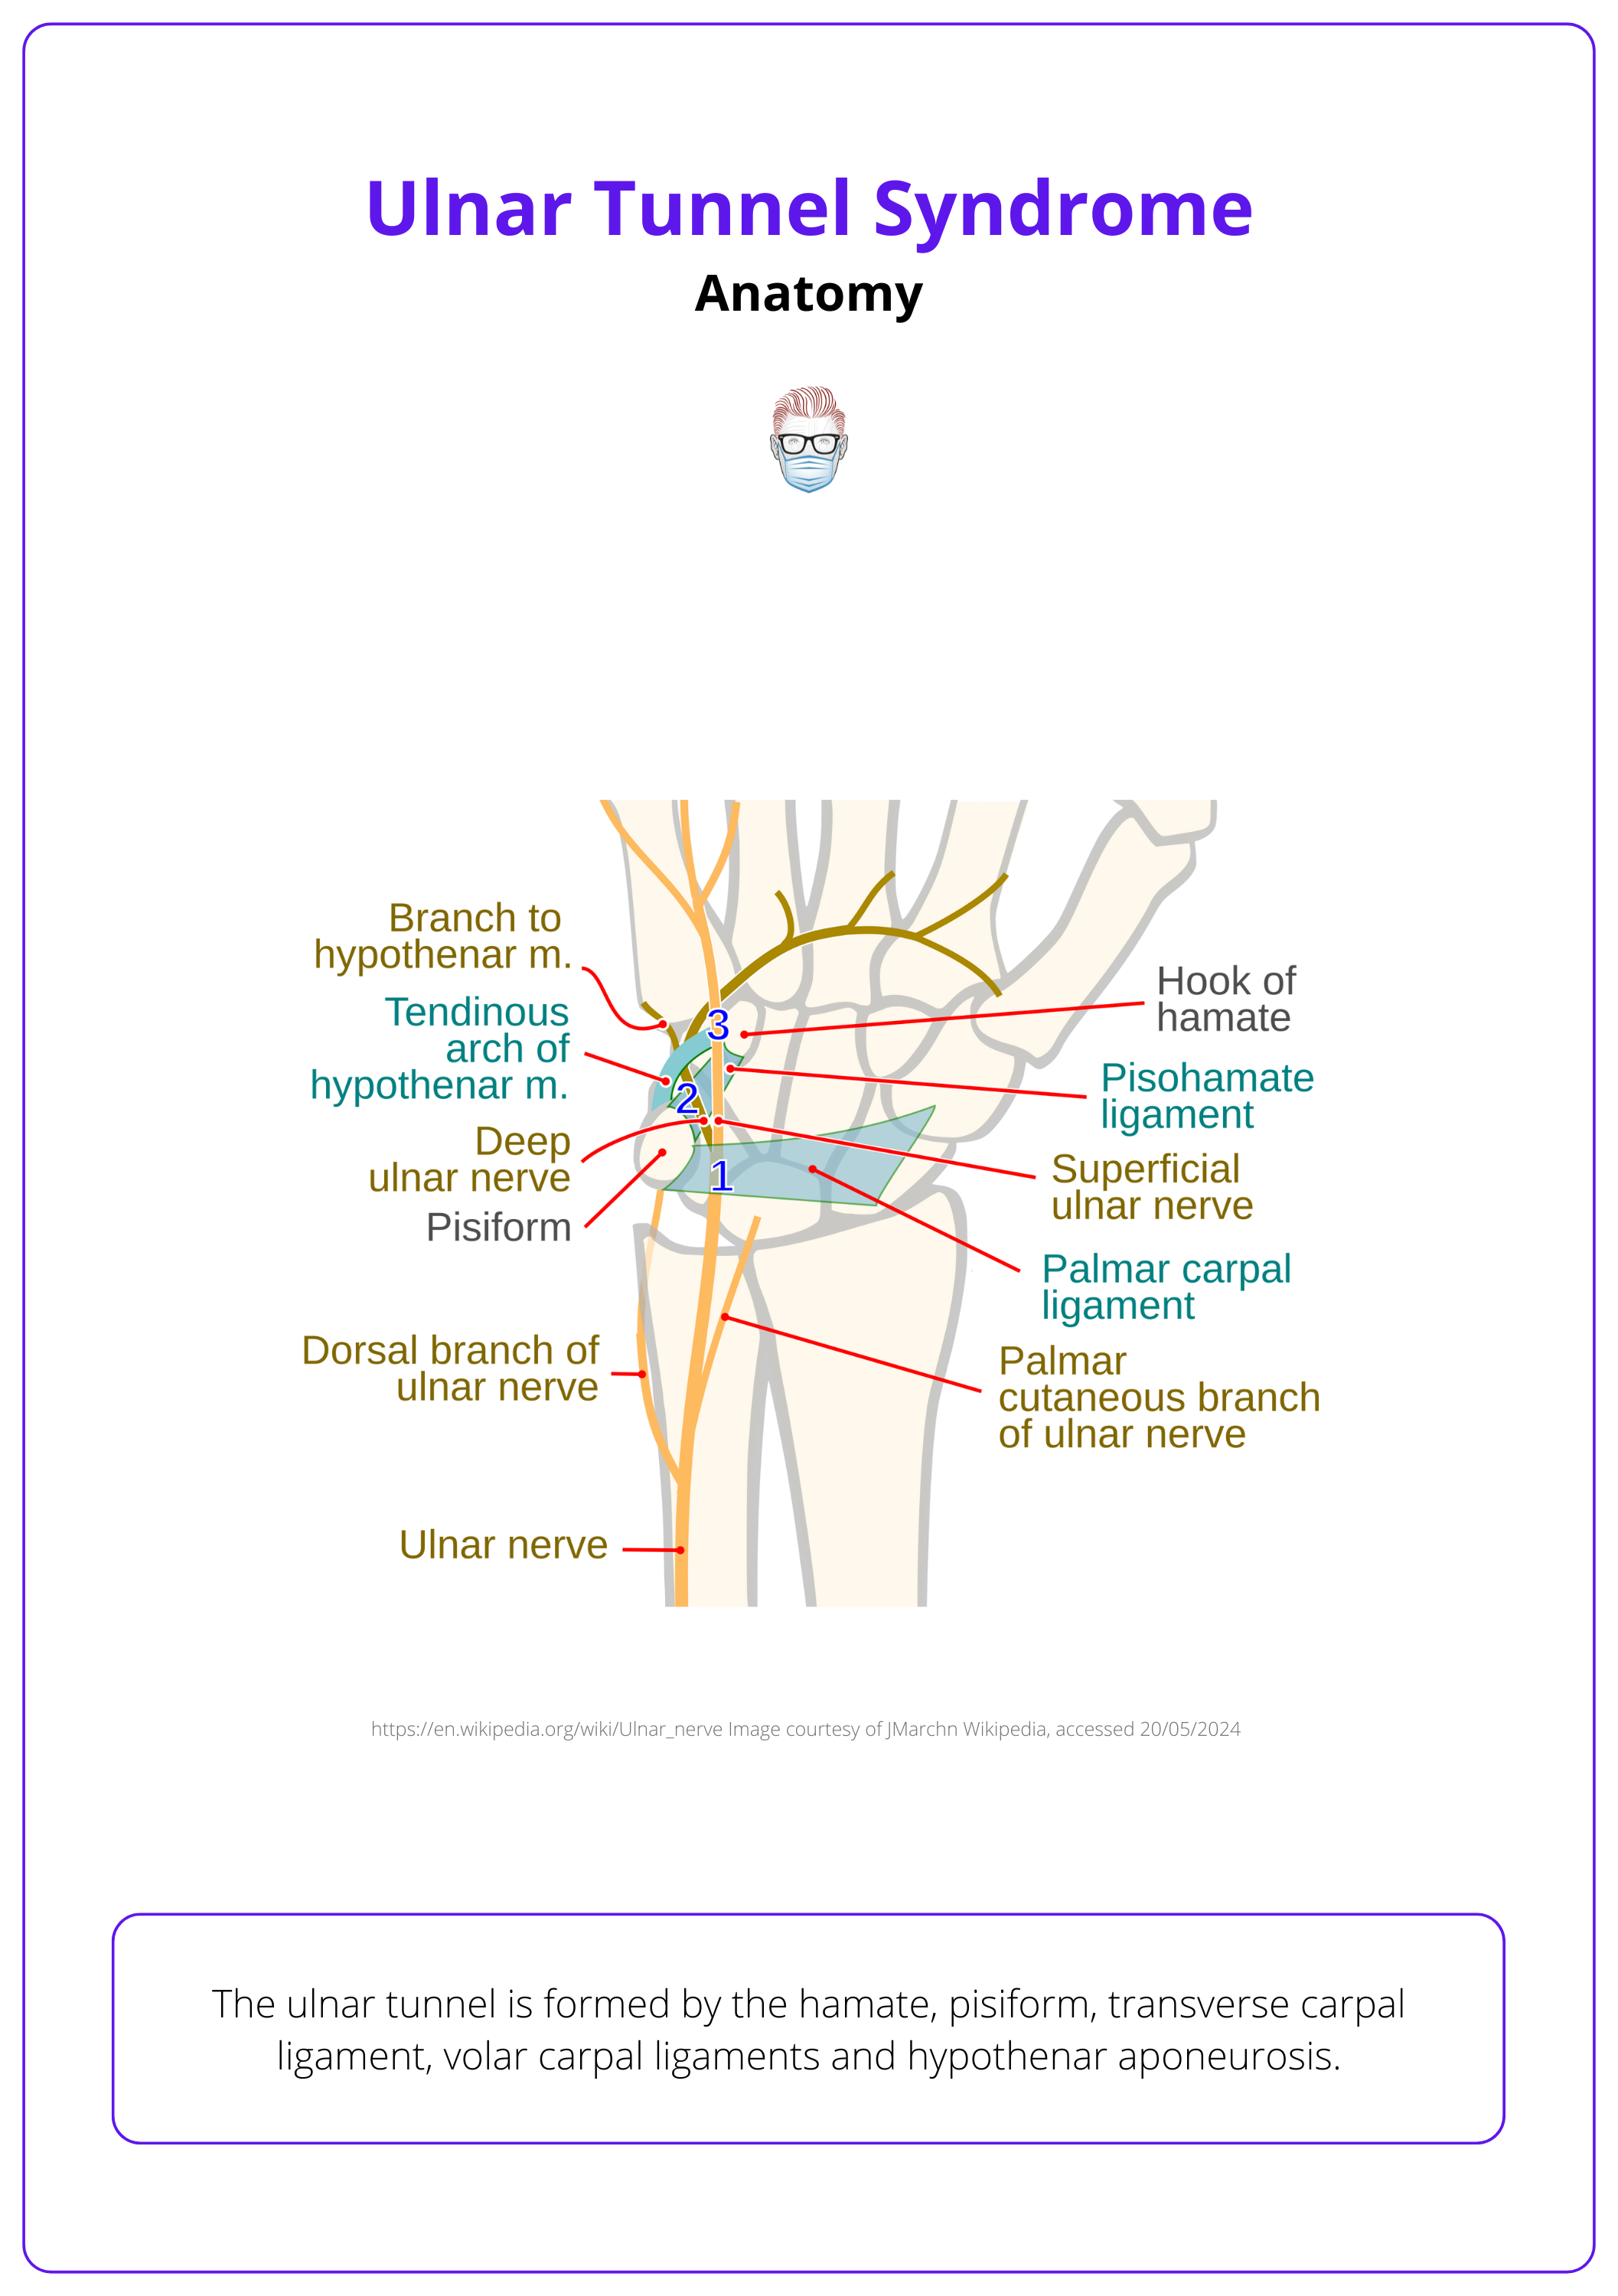 Anatomy of the ulnar tunnel, Ulnar Tunnel Syndrome